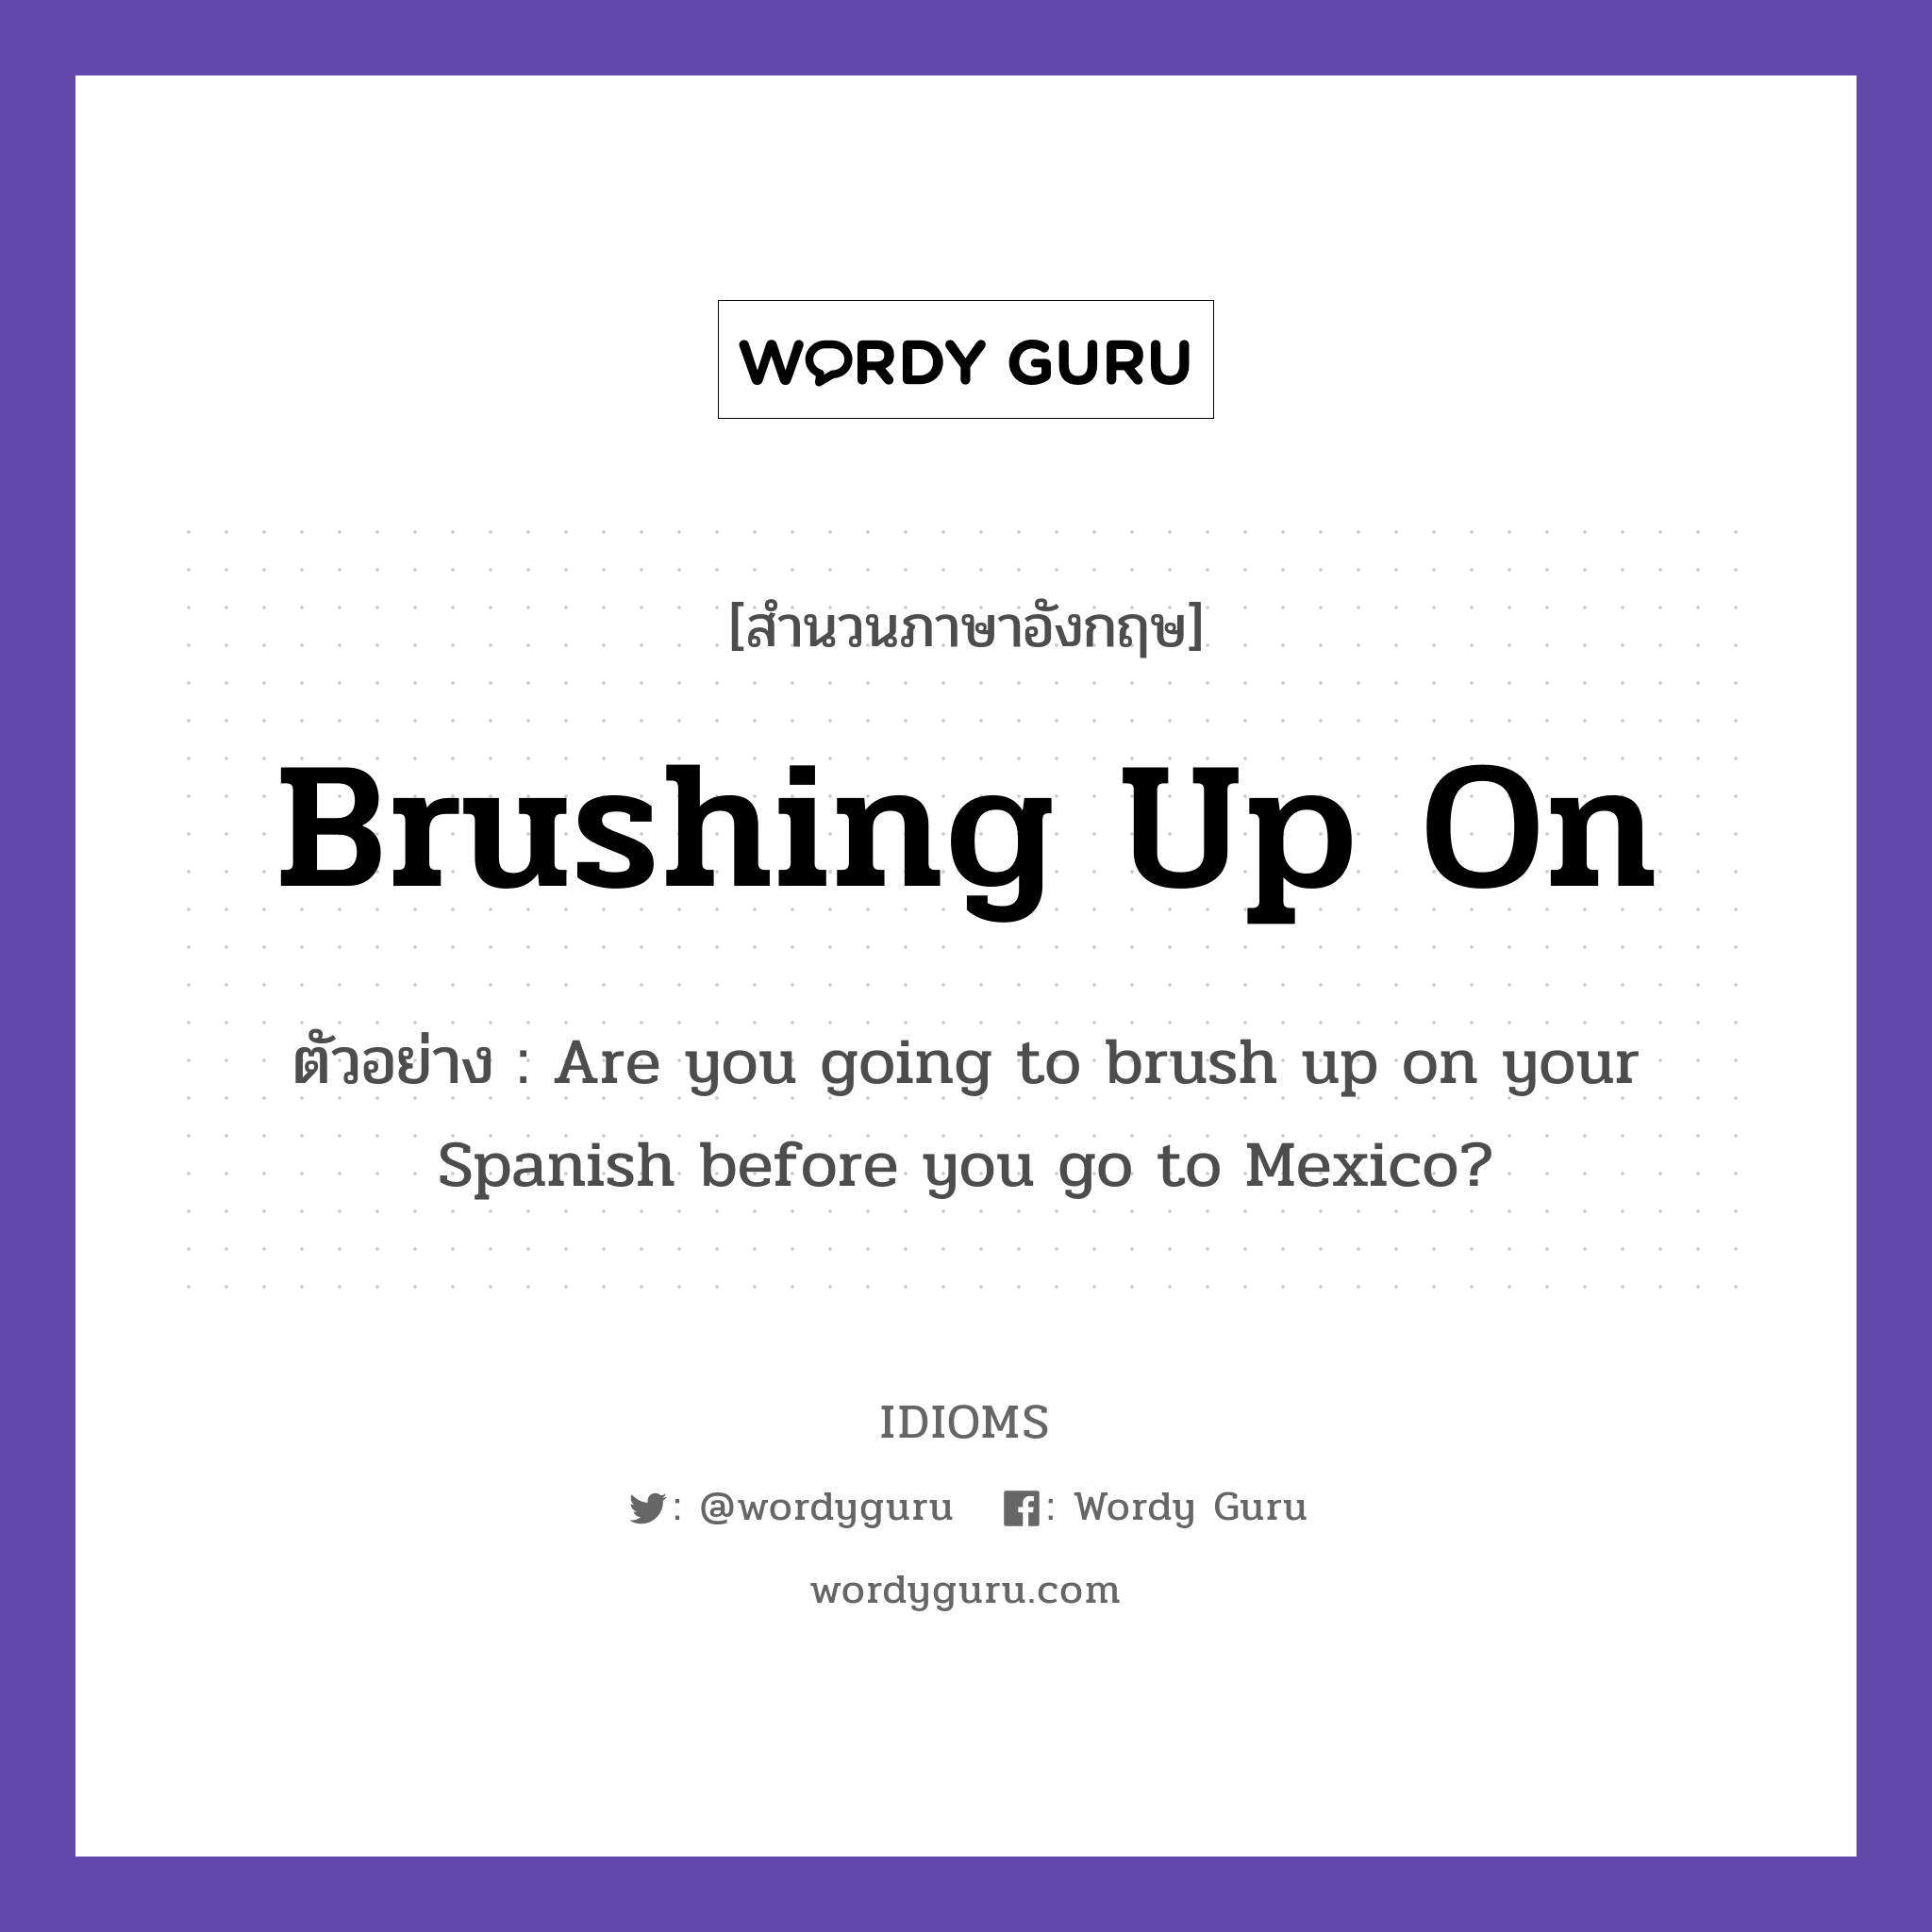 Brushing Up On แปลว่า?, สำนวนภาษาอังกฤษ Brushing Up On ตัวอย่าง Are you going to brush up on your Spanish before you go to Mexico?